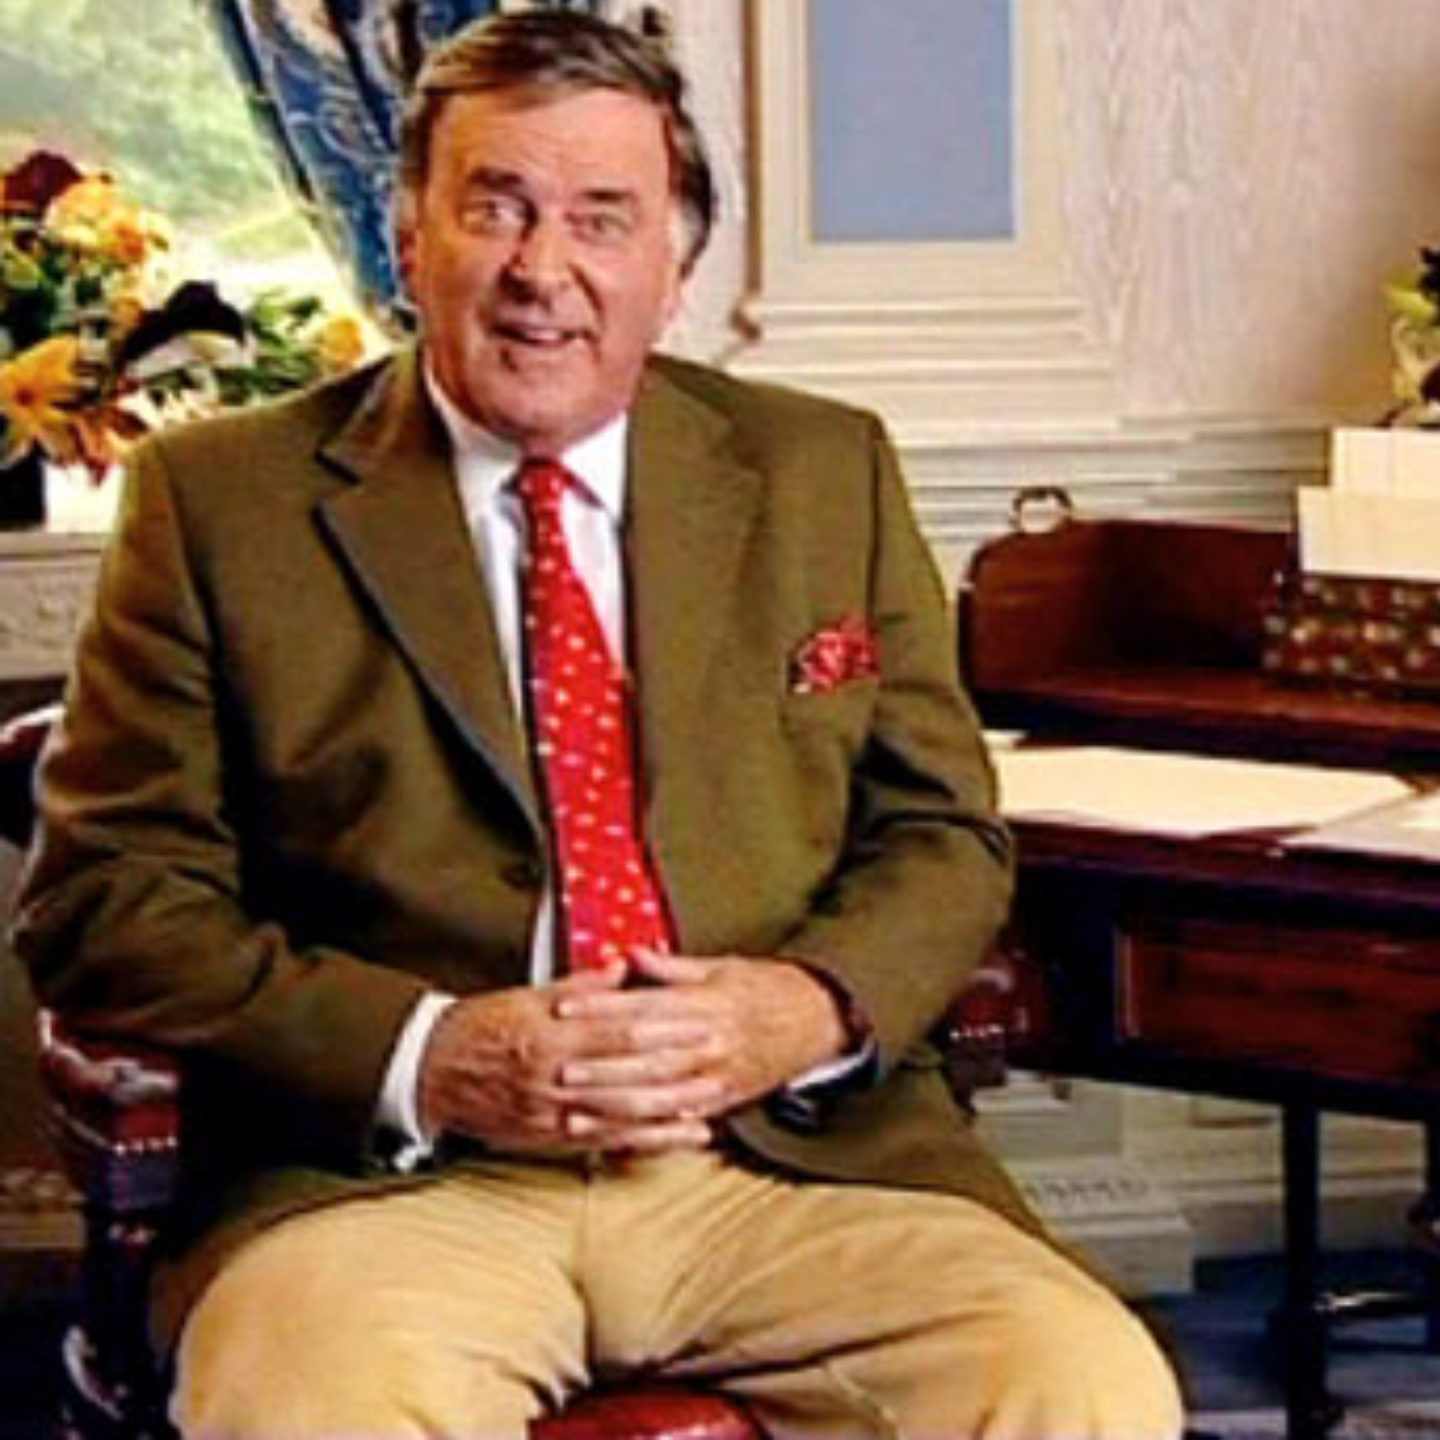 #129 - Terry Wogan's Long Shadow (and other titles)